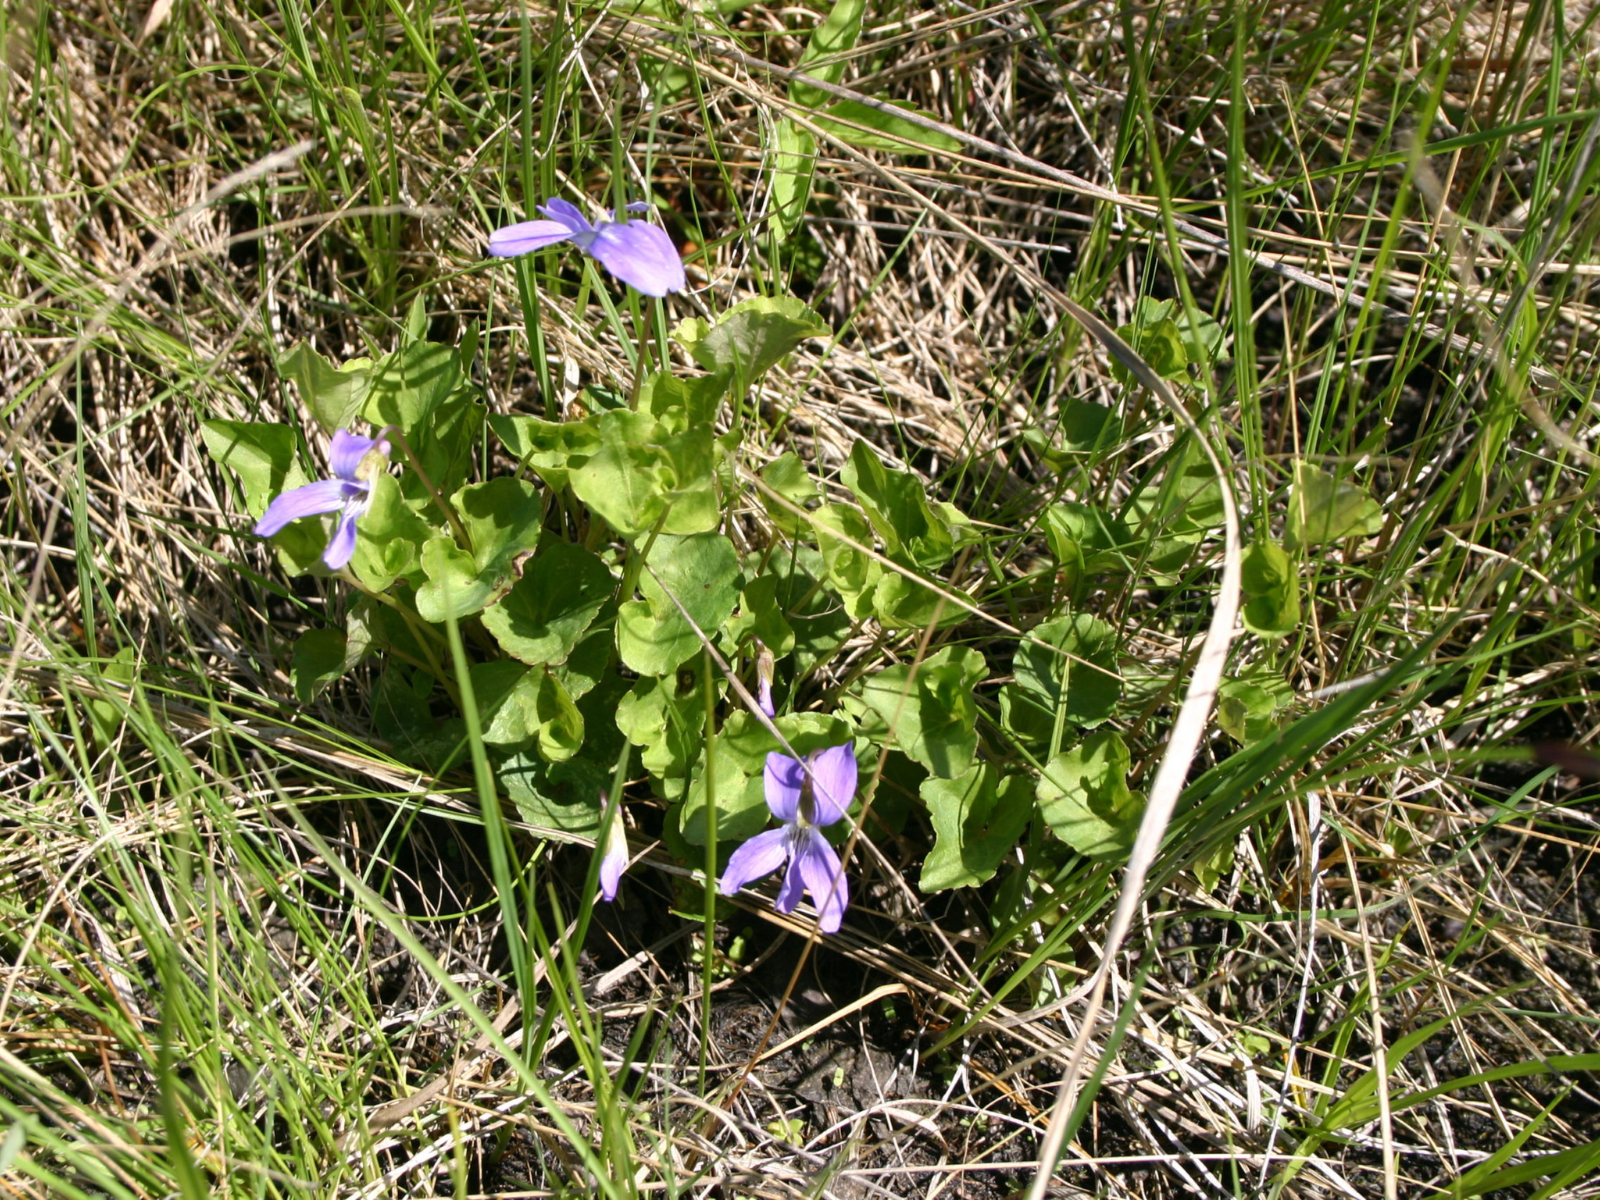 A small plant growing low to the ground with purple-blue flowers.